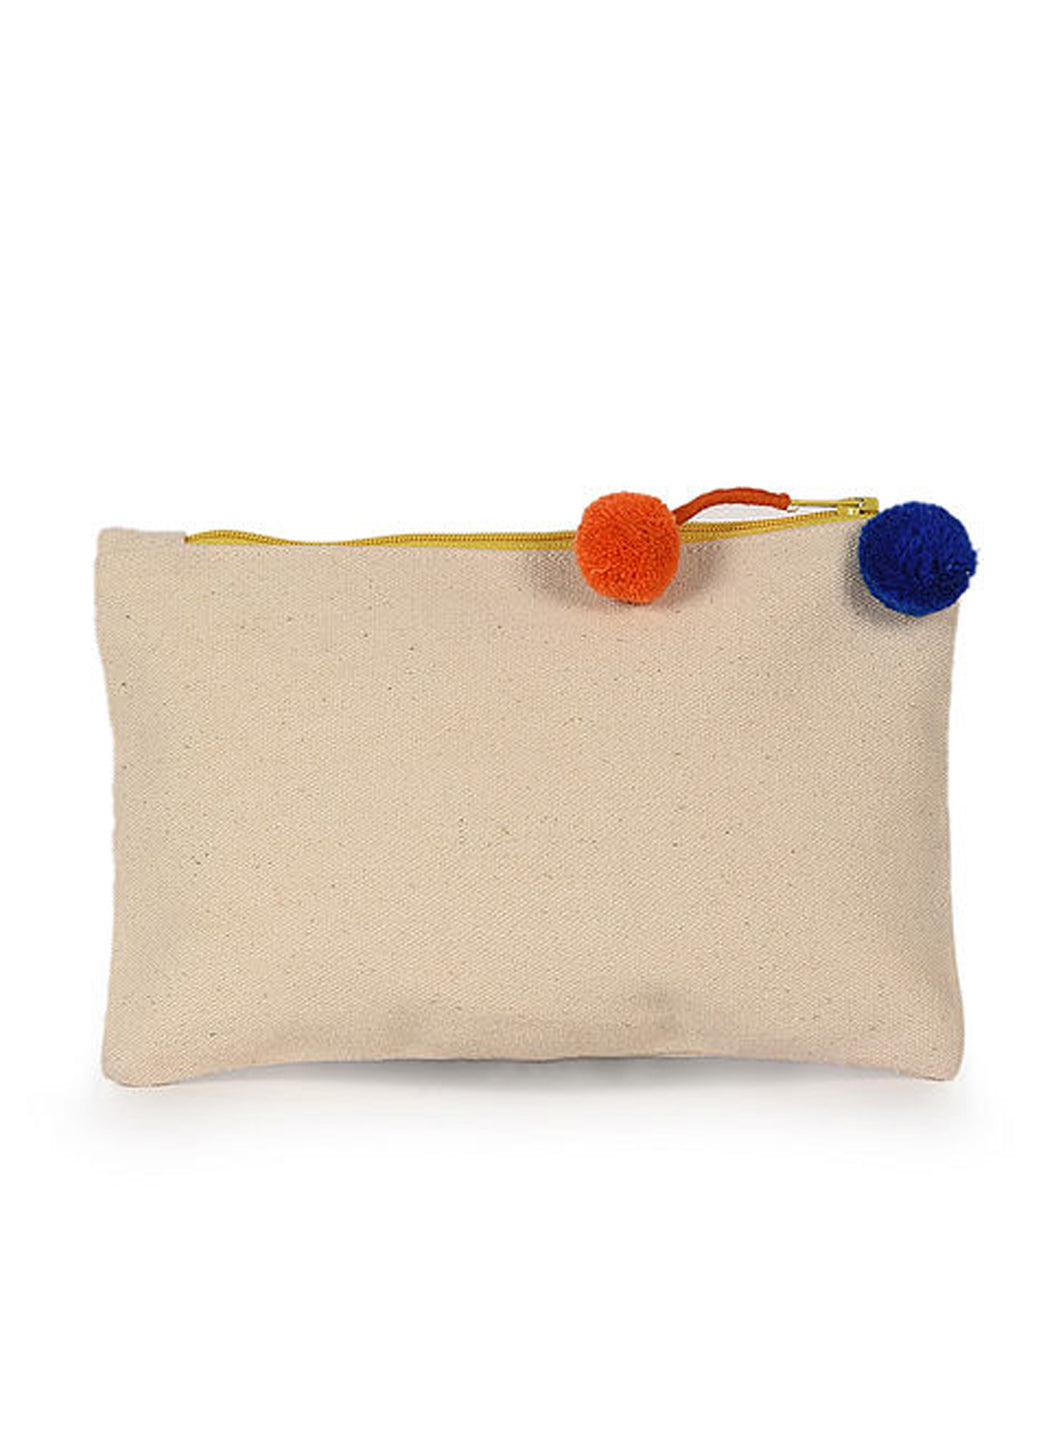 Kanyoga Cotton Canvas Pouch With Contrast Bright Yellow Zip & Dual Bright Disty Pom-Pom For Women